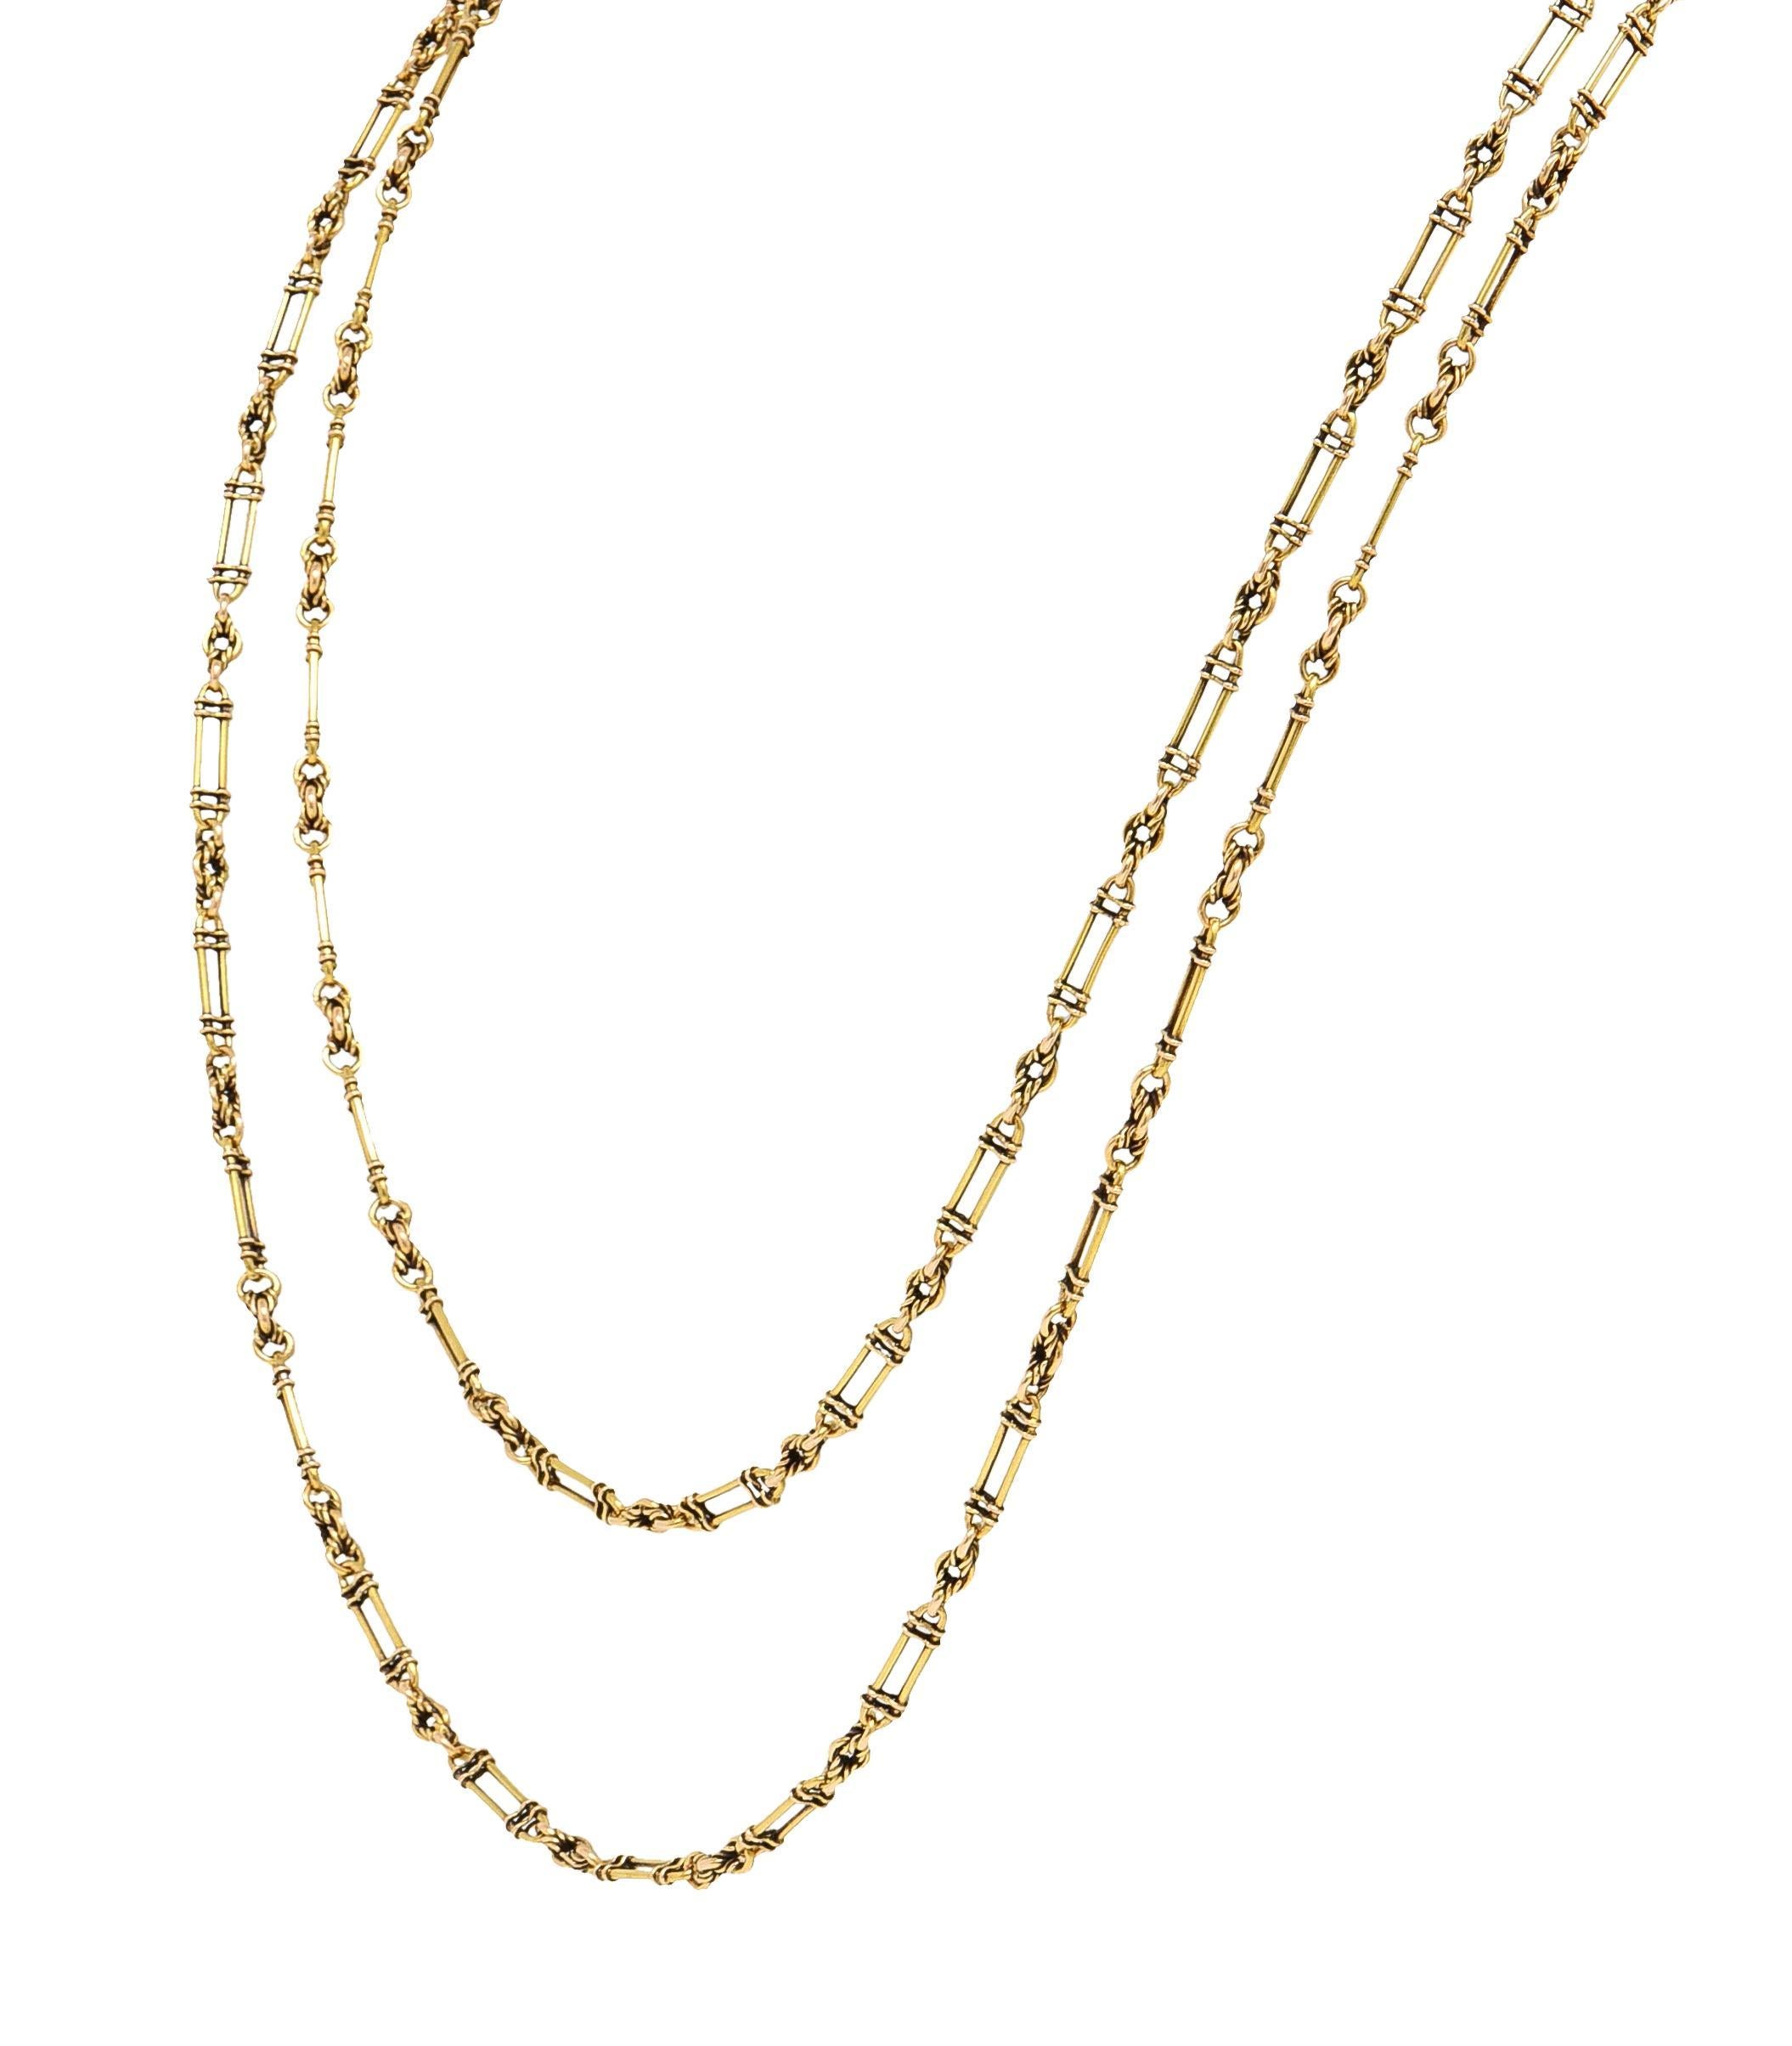 Women's or Men's Victorian 15 Karat Yellow Gold Elongated Oval Link Antique Chain Necklace For Sale